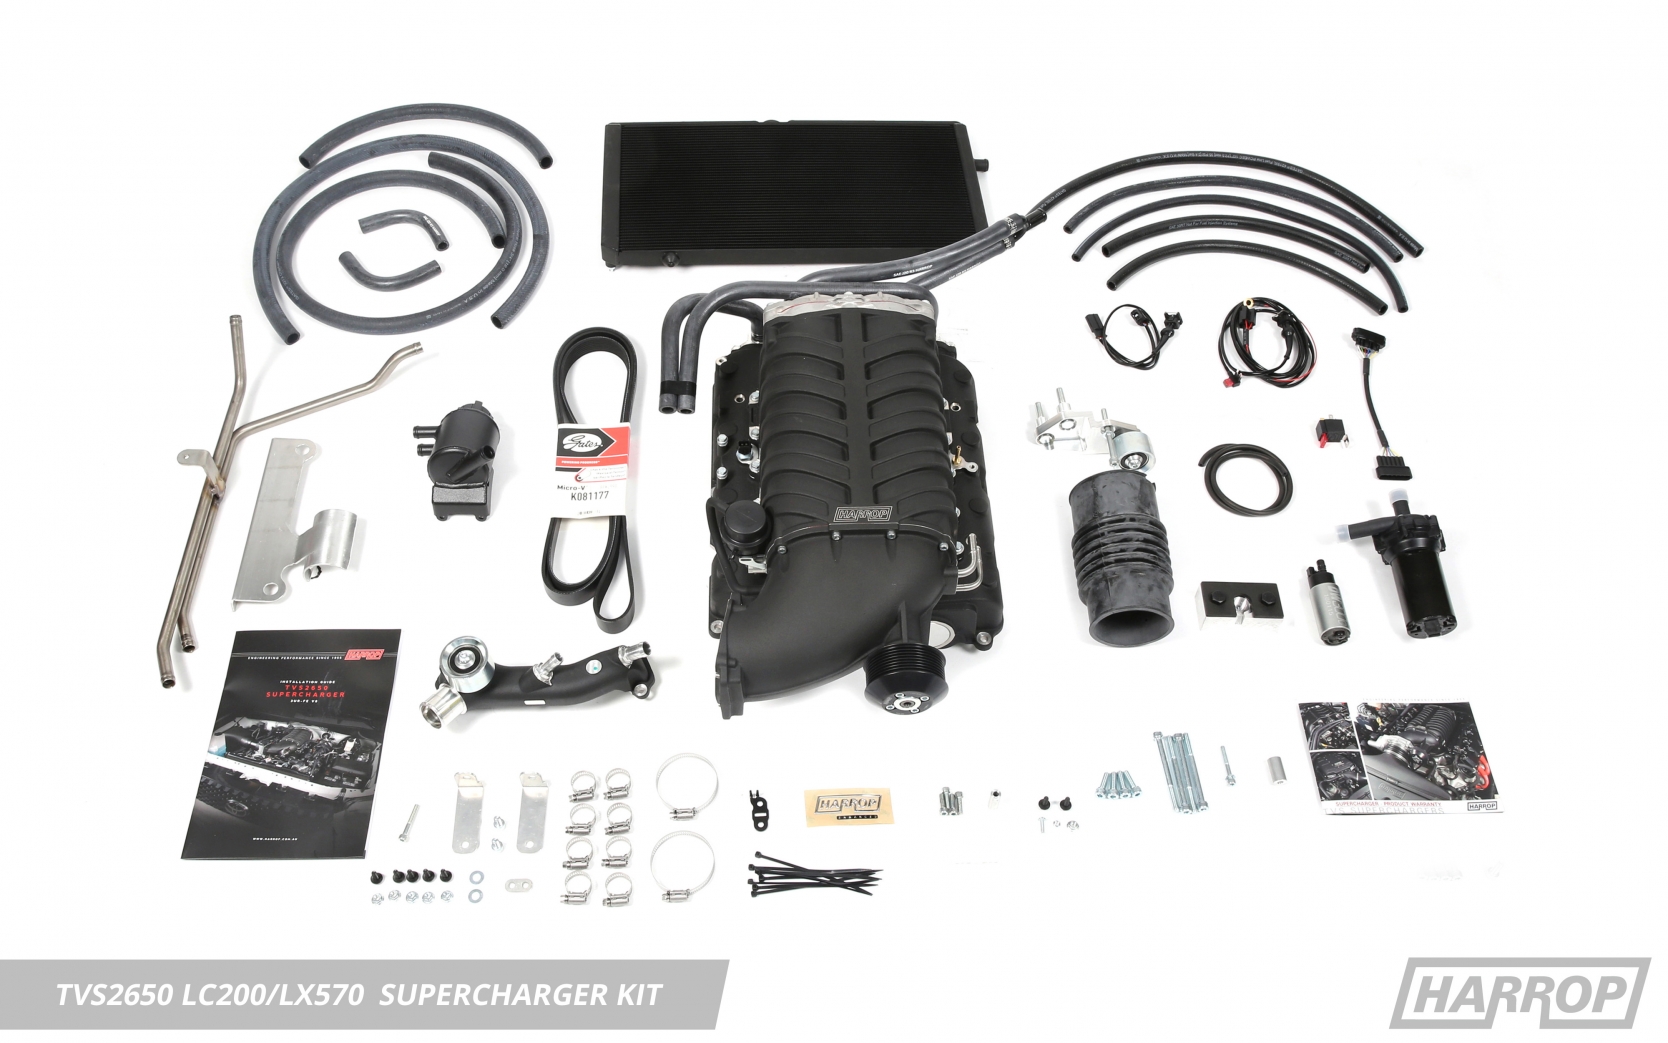 TVS2650 Supercharger Kit | LC 200